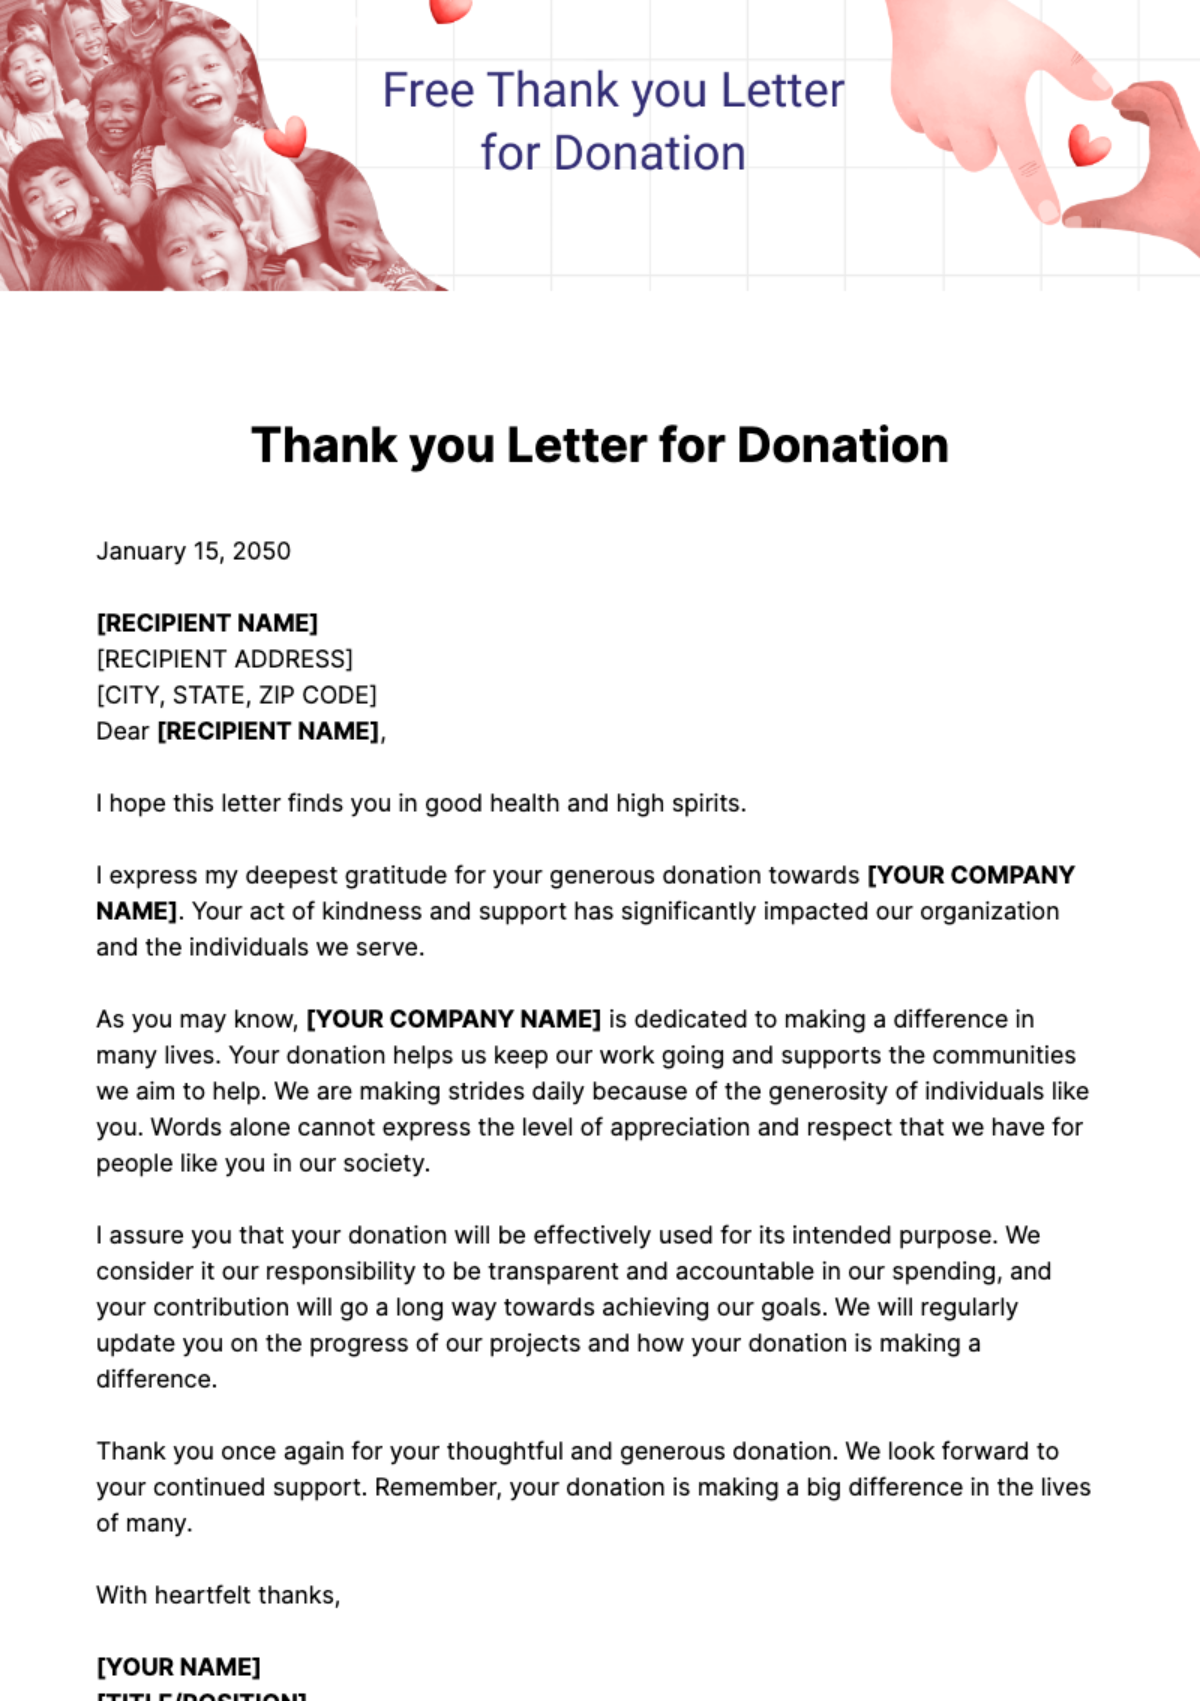 Thank you Letter for Donation Template